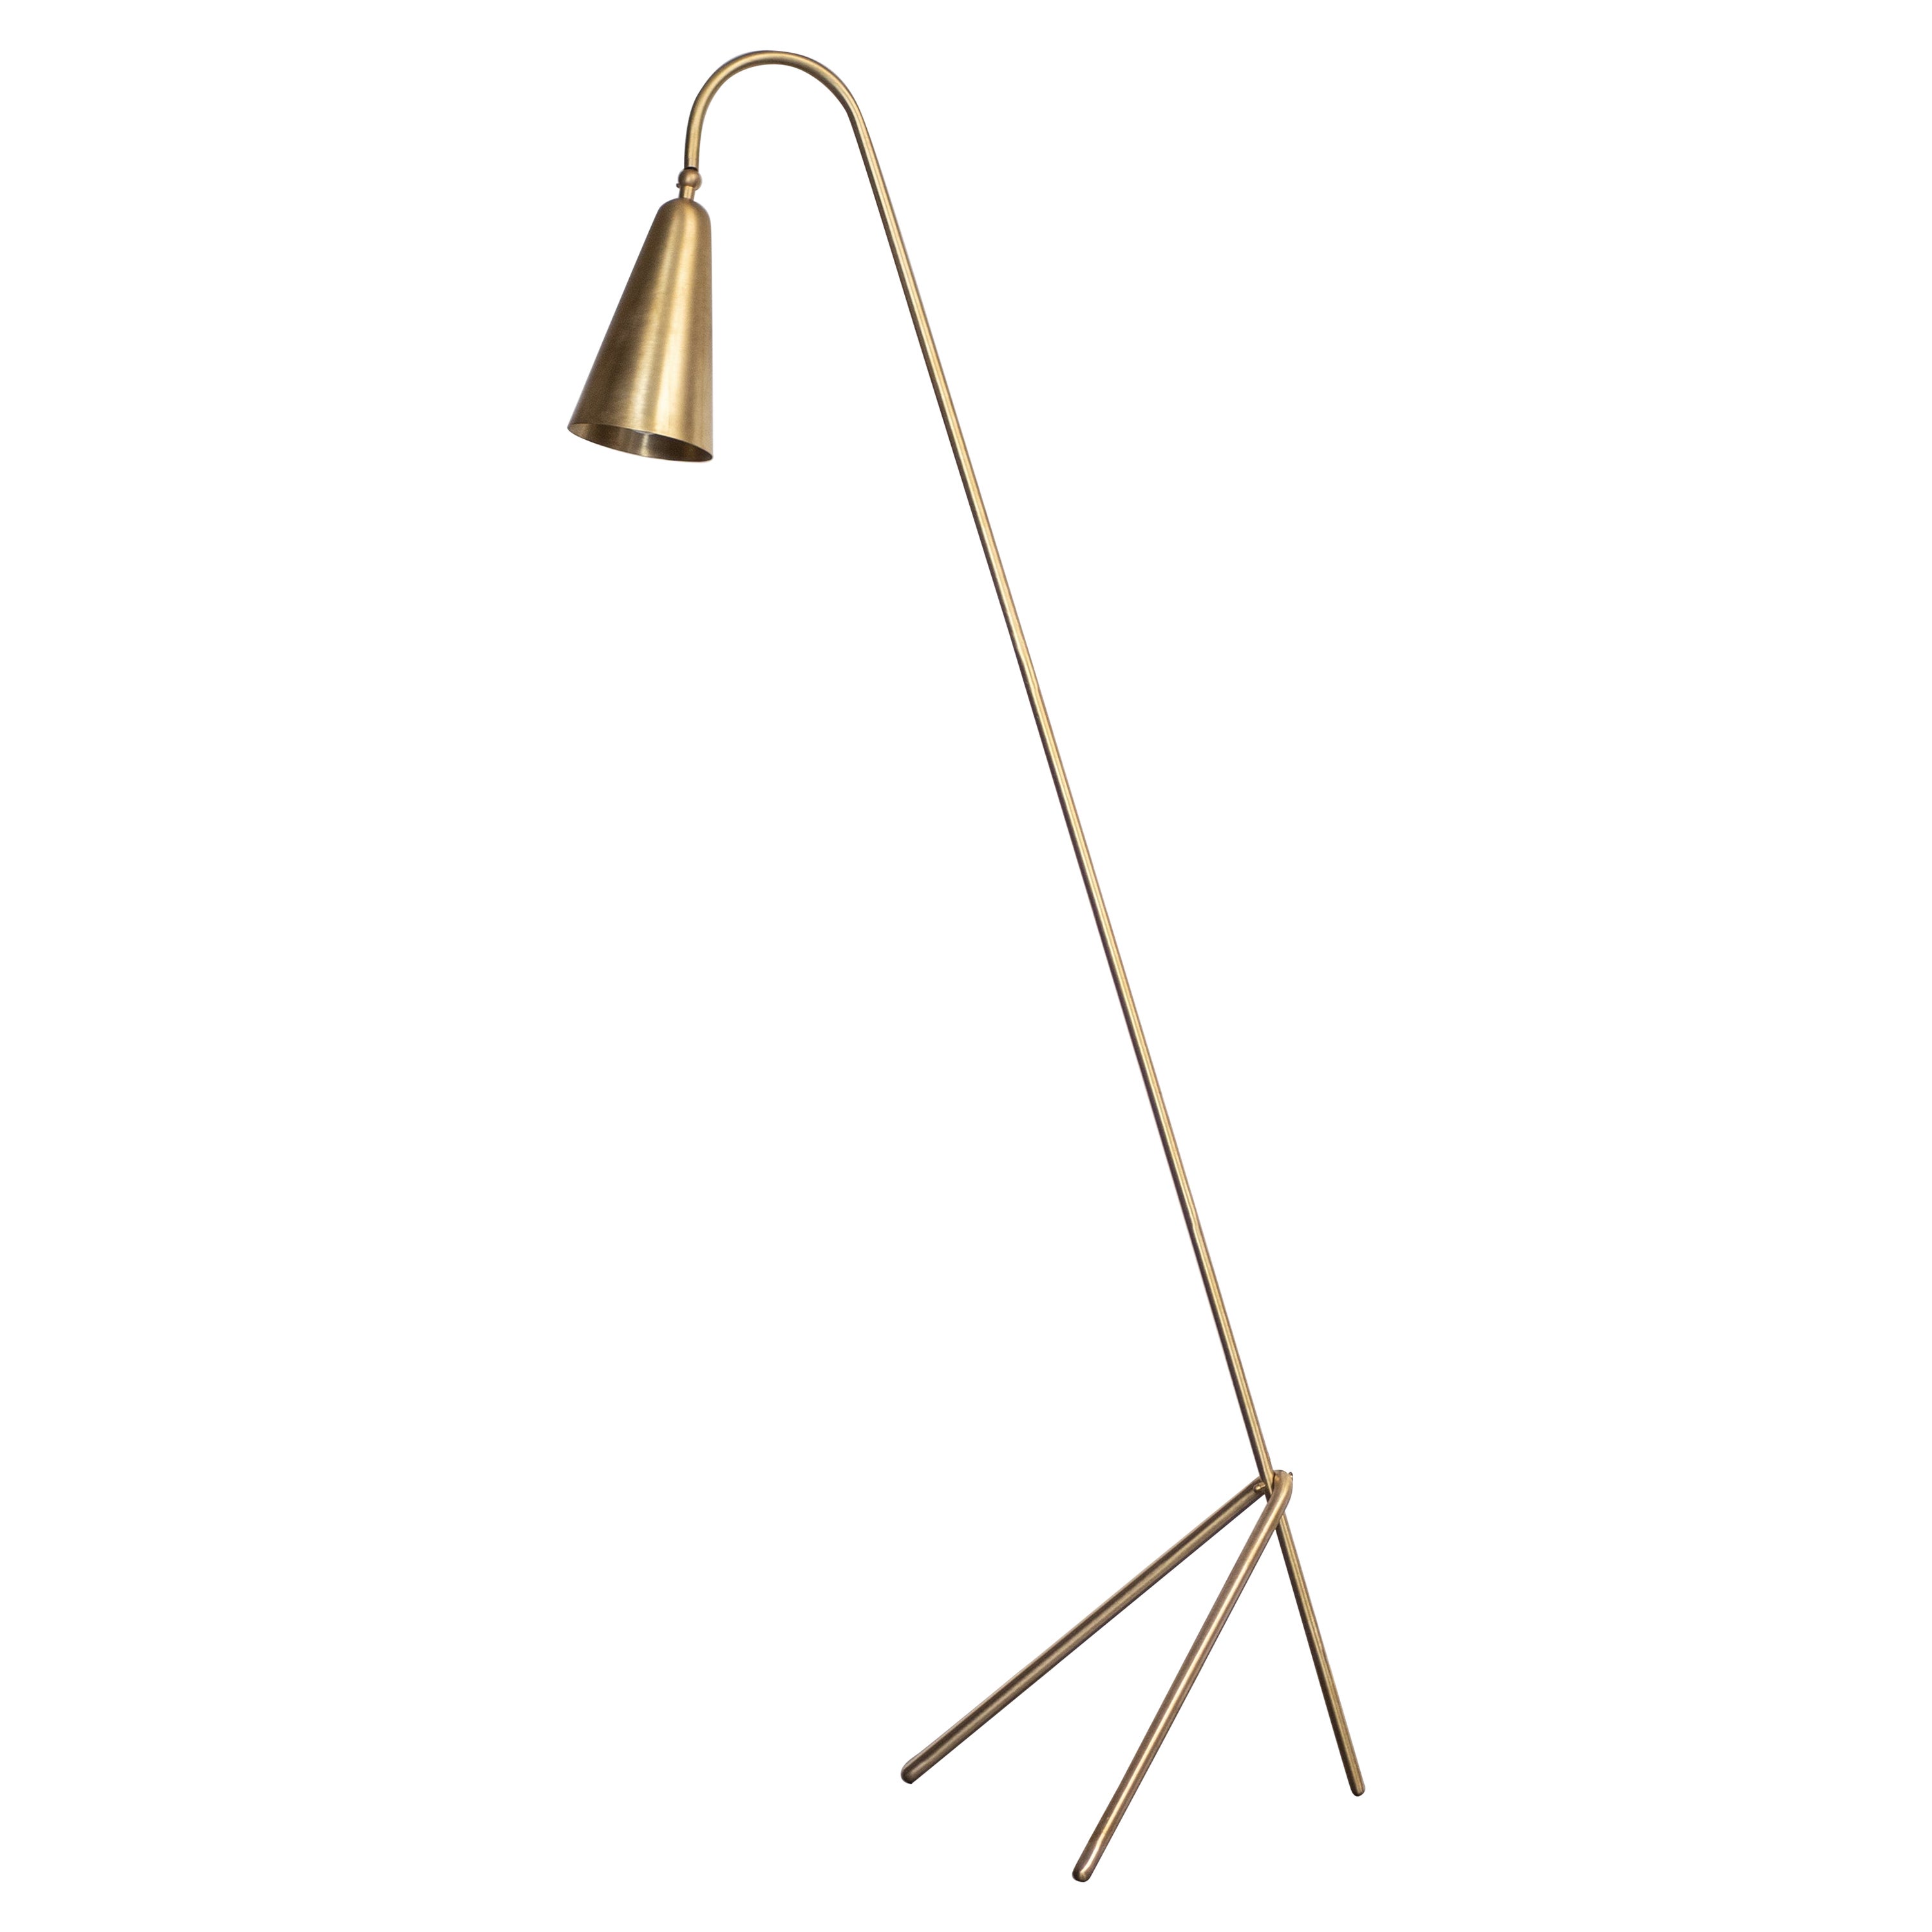 Natural Brass Contemporary-Modern Floor Lamp Handcrafted in Italy by 247lab